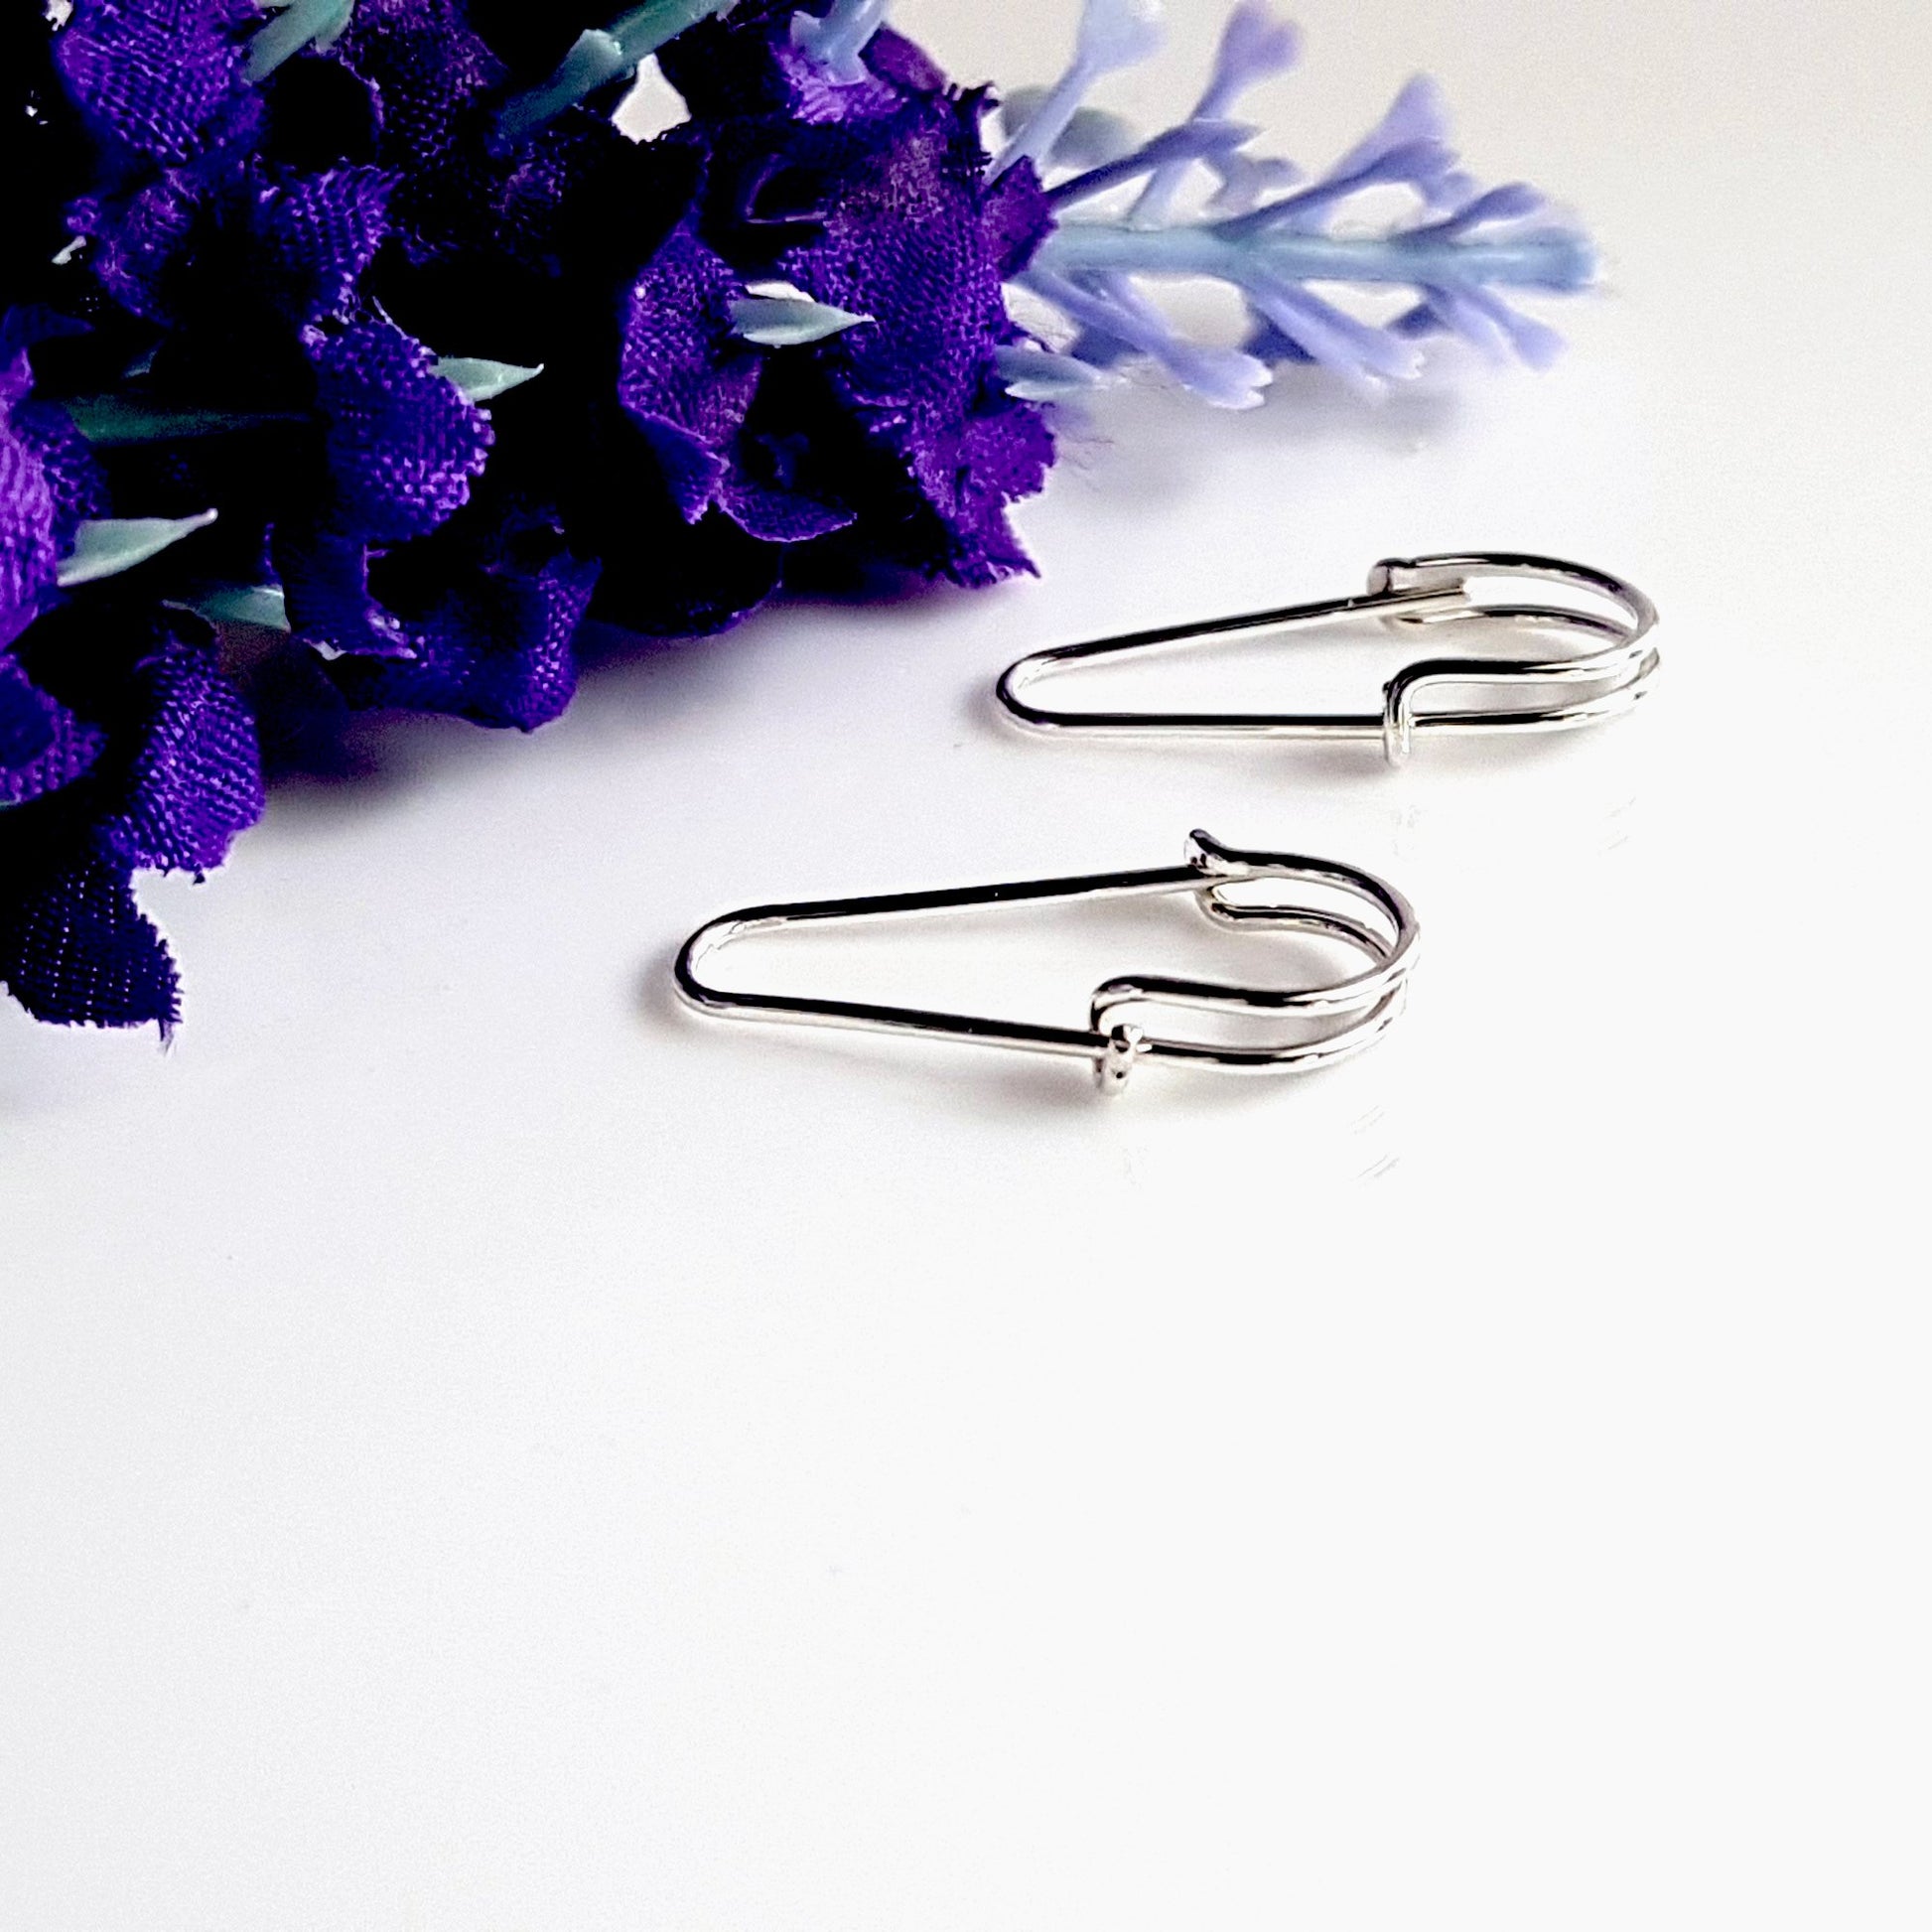 Safety Pin Artisan Earrings in Sterling Silver | Kalitheo